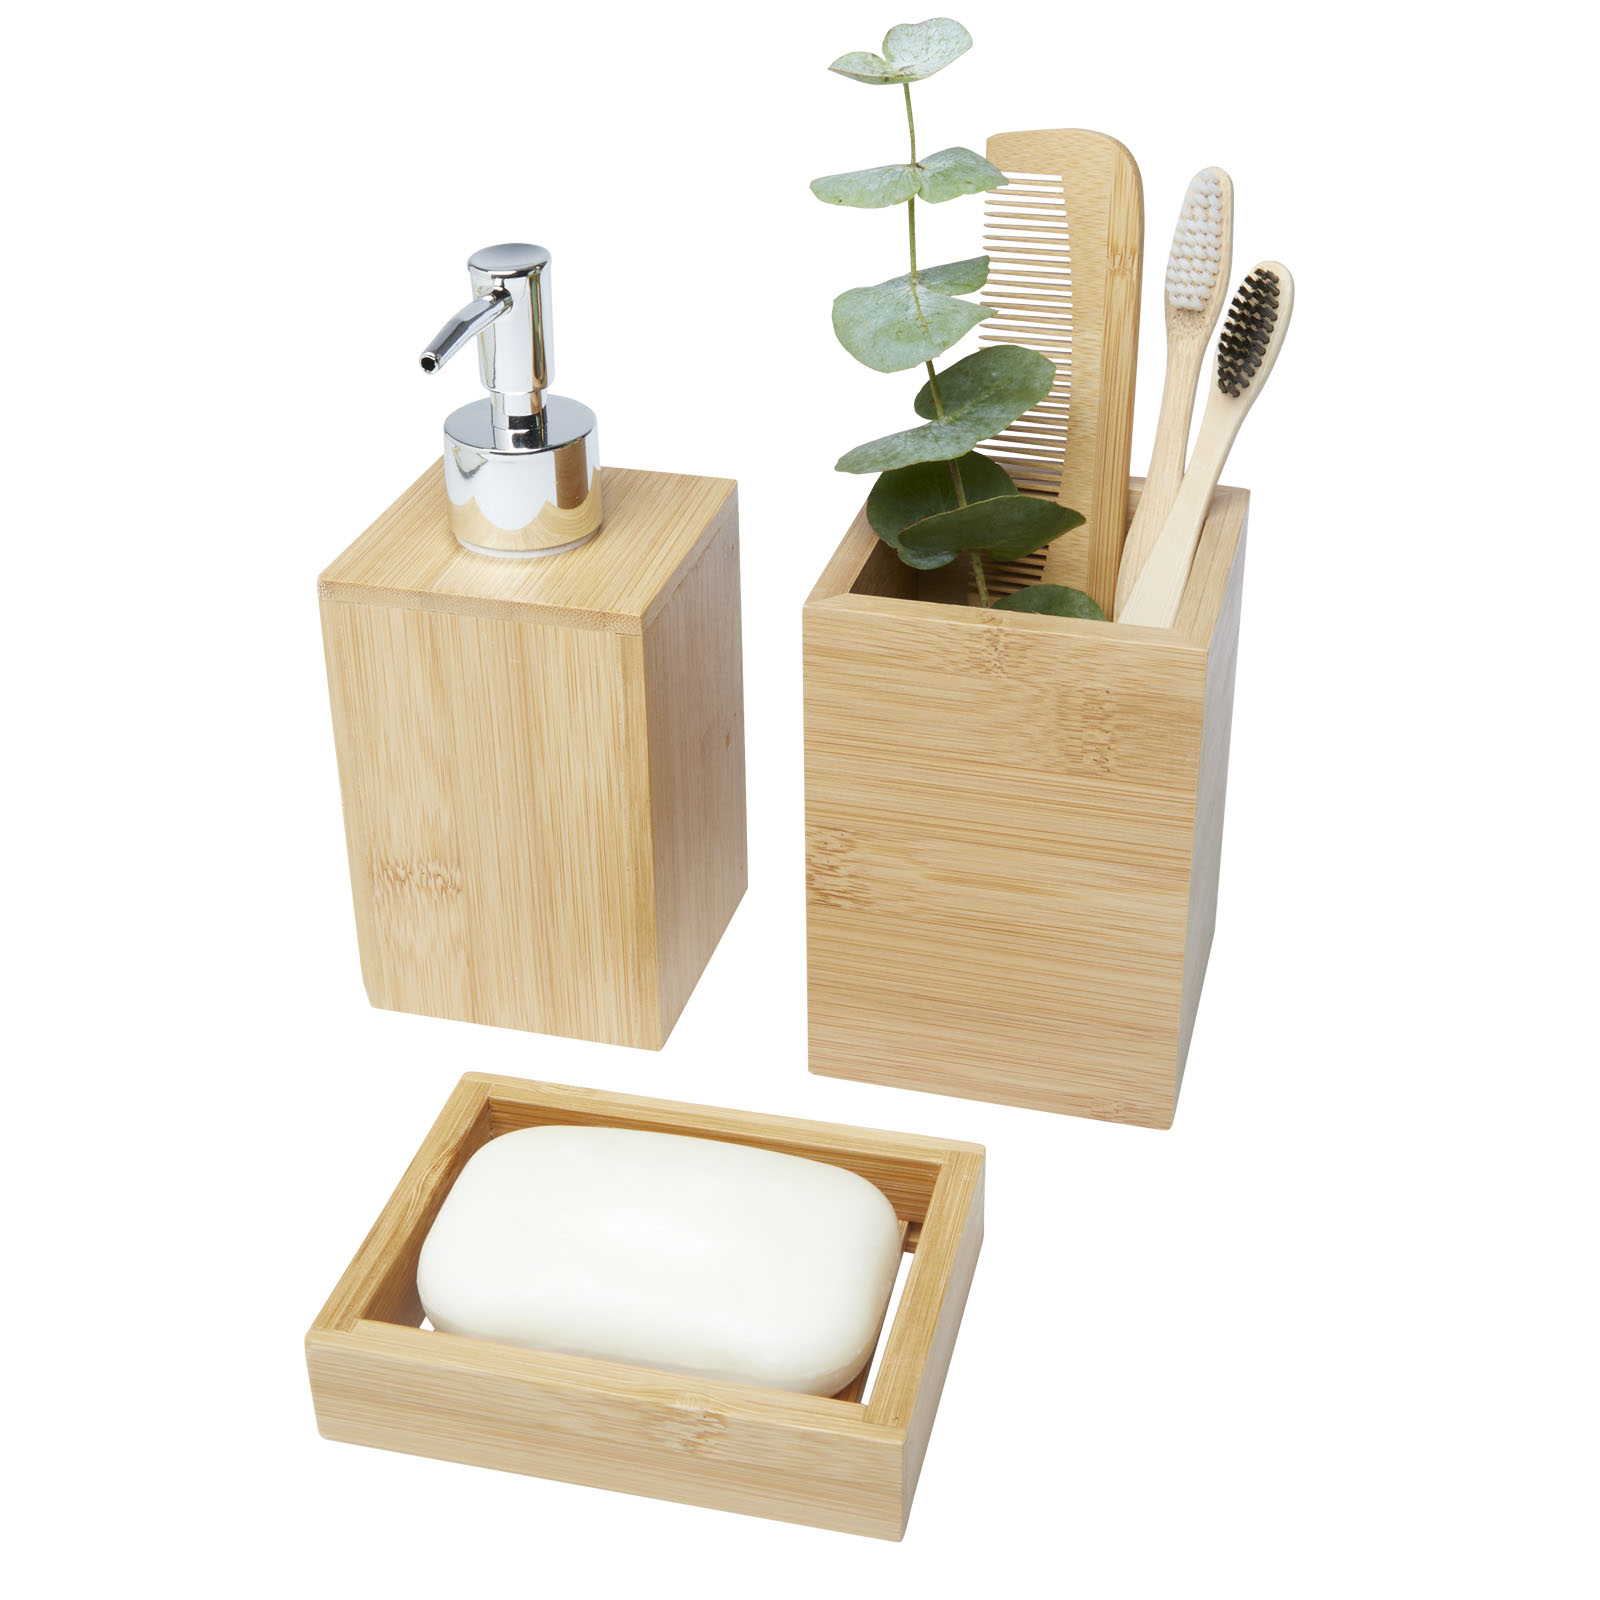 Advertising Home Accessories - Hedon 3-piece bamboo bathroom set - 2